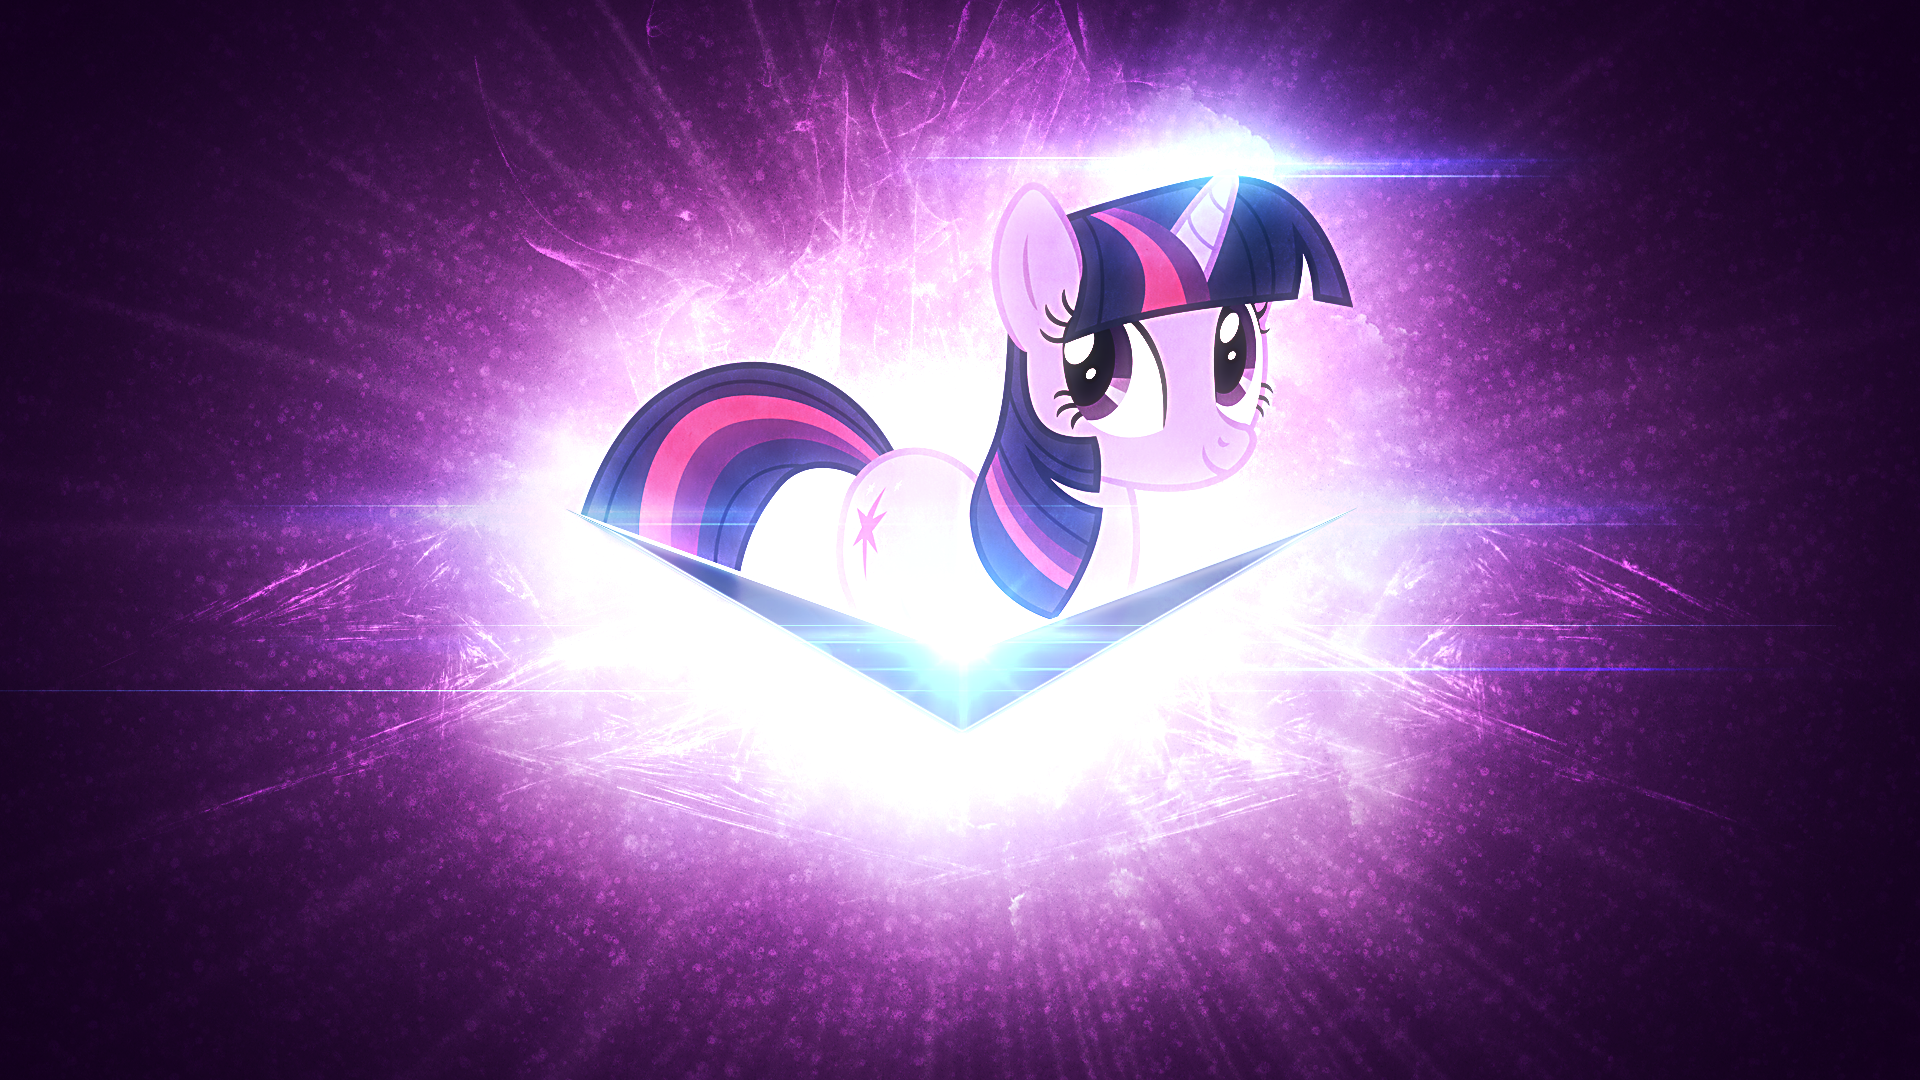 Twilight Wallpaper by 90Sigma and Tzolkine